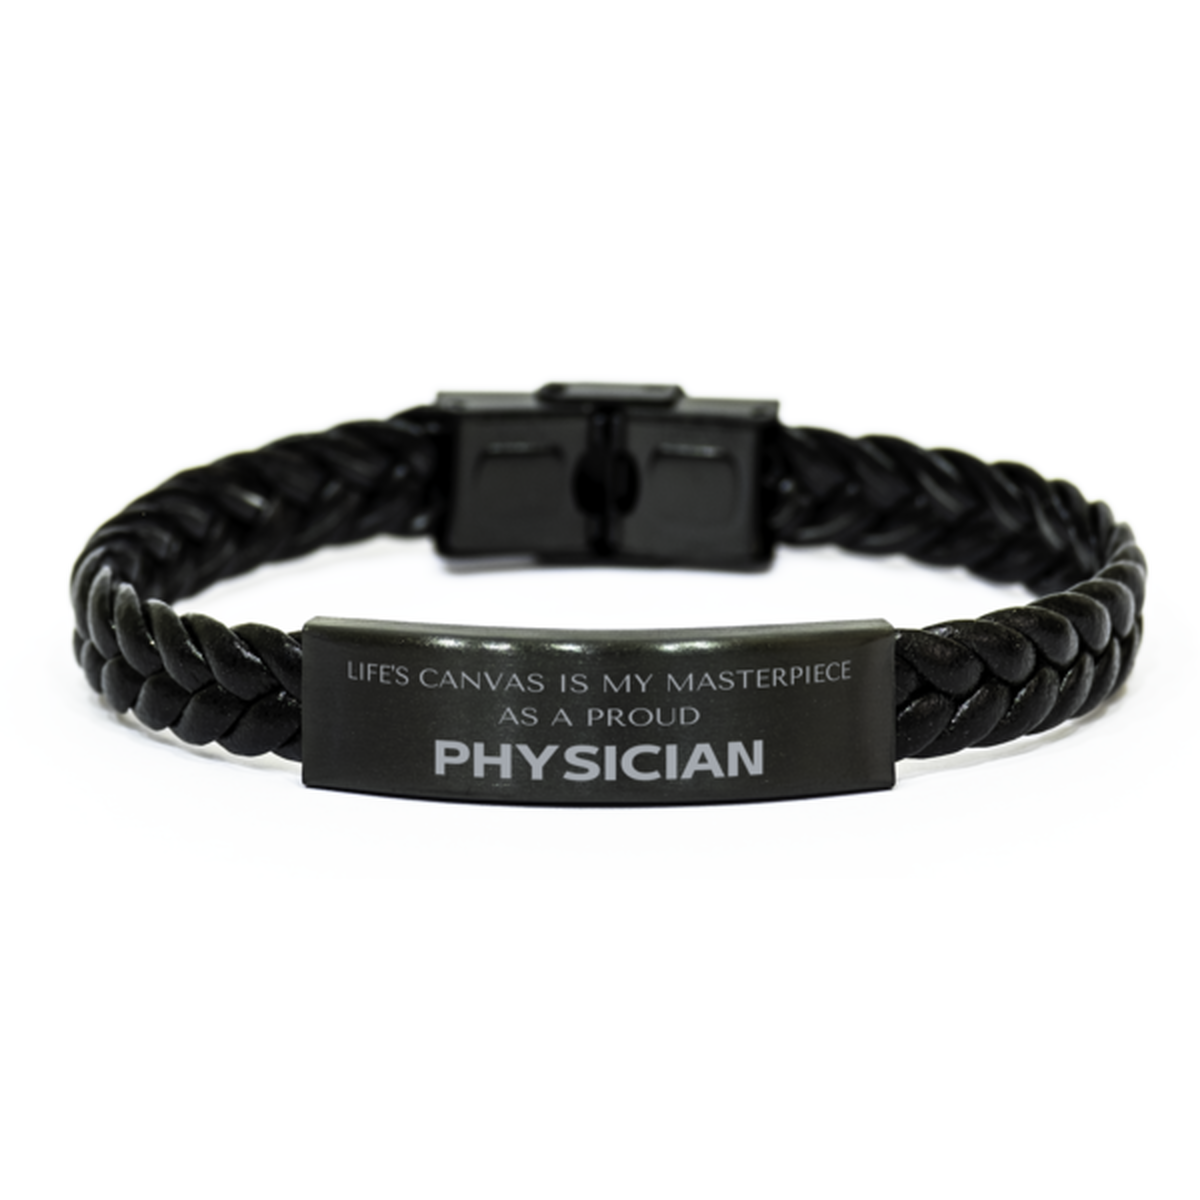 Proud Physician Gifts, Life's canvas is my masterpiece, Epic Birthday Christmas Unique Braided Leather Bracelet For Physician, Coworkers, Men, Women, Friends